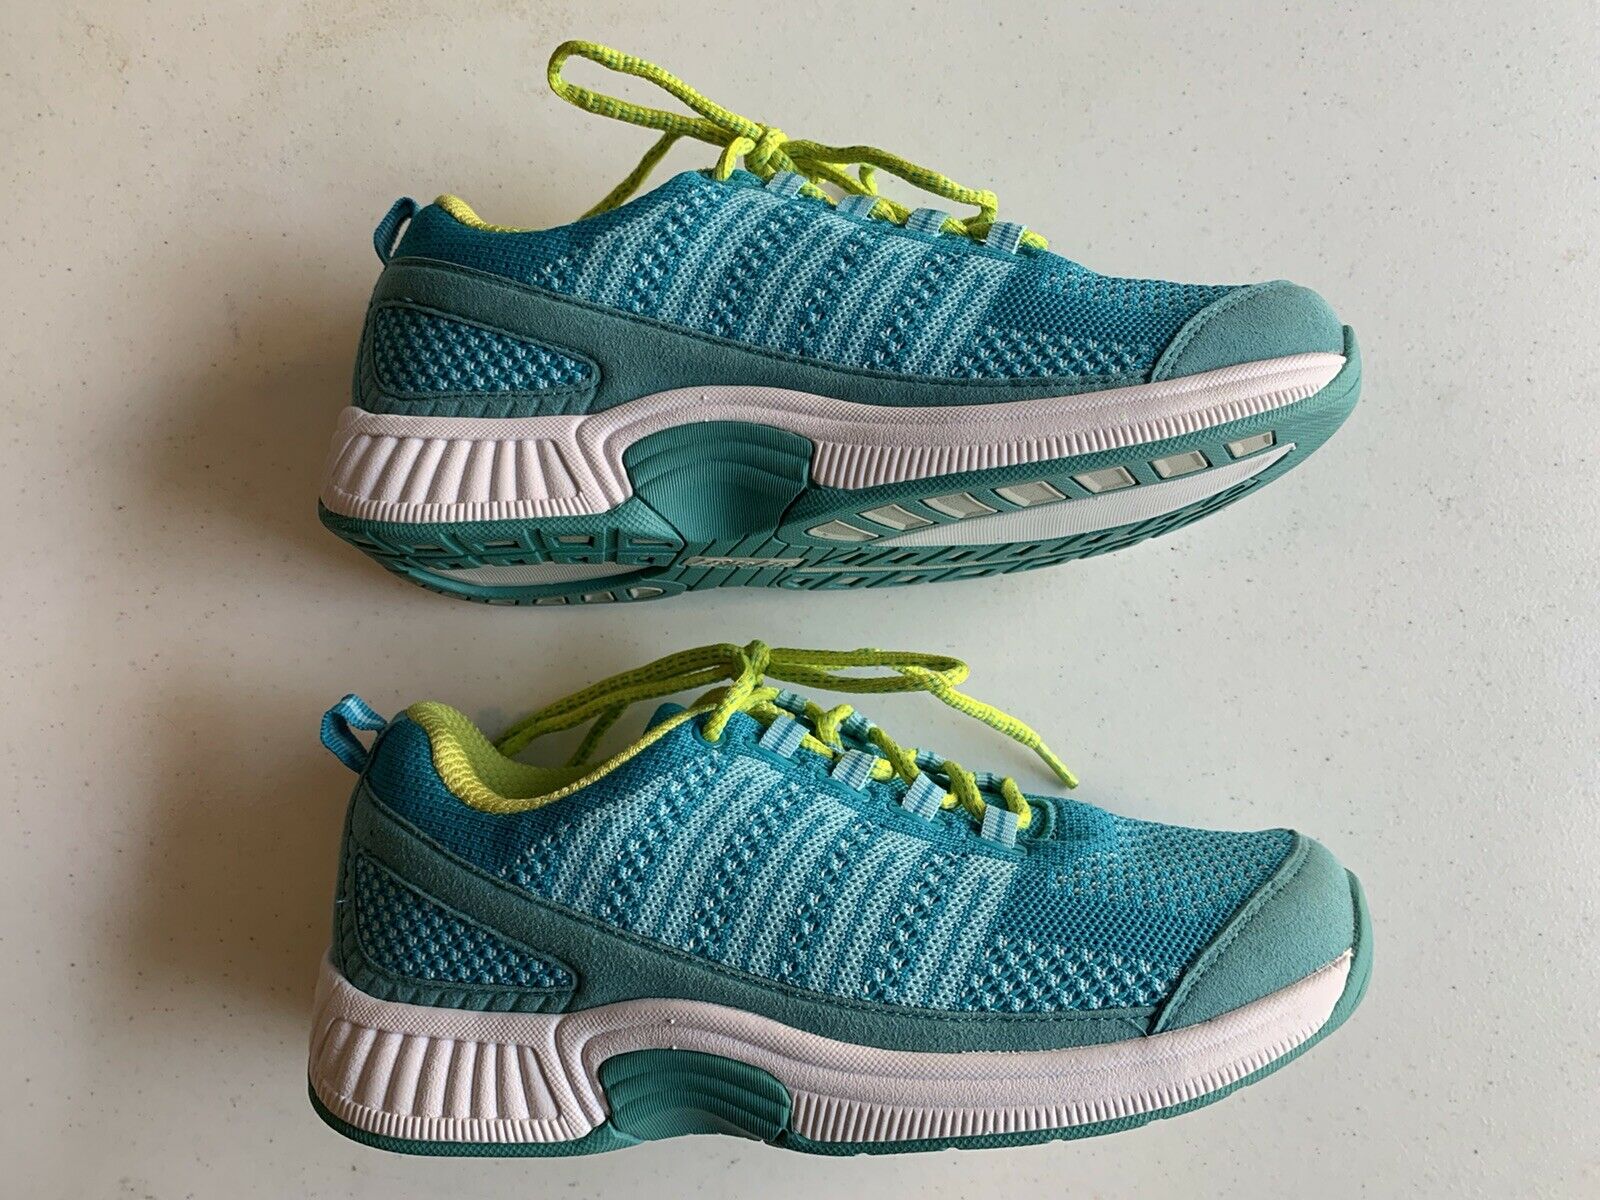 Biofit 986 Comfort Walking Athletic Shoes Sneakers Women's 7.5 D Wide NO INSERTS